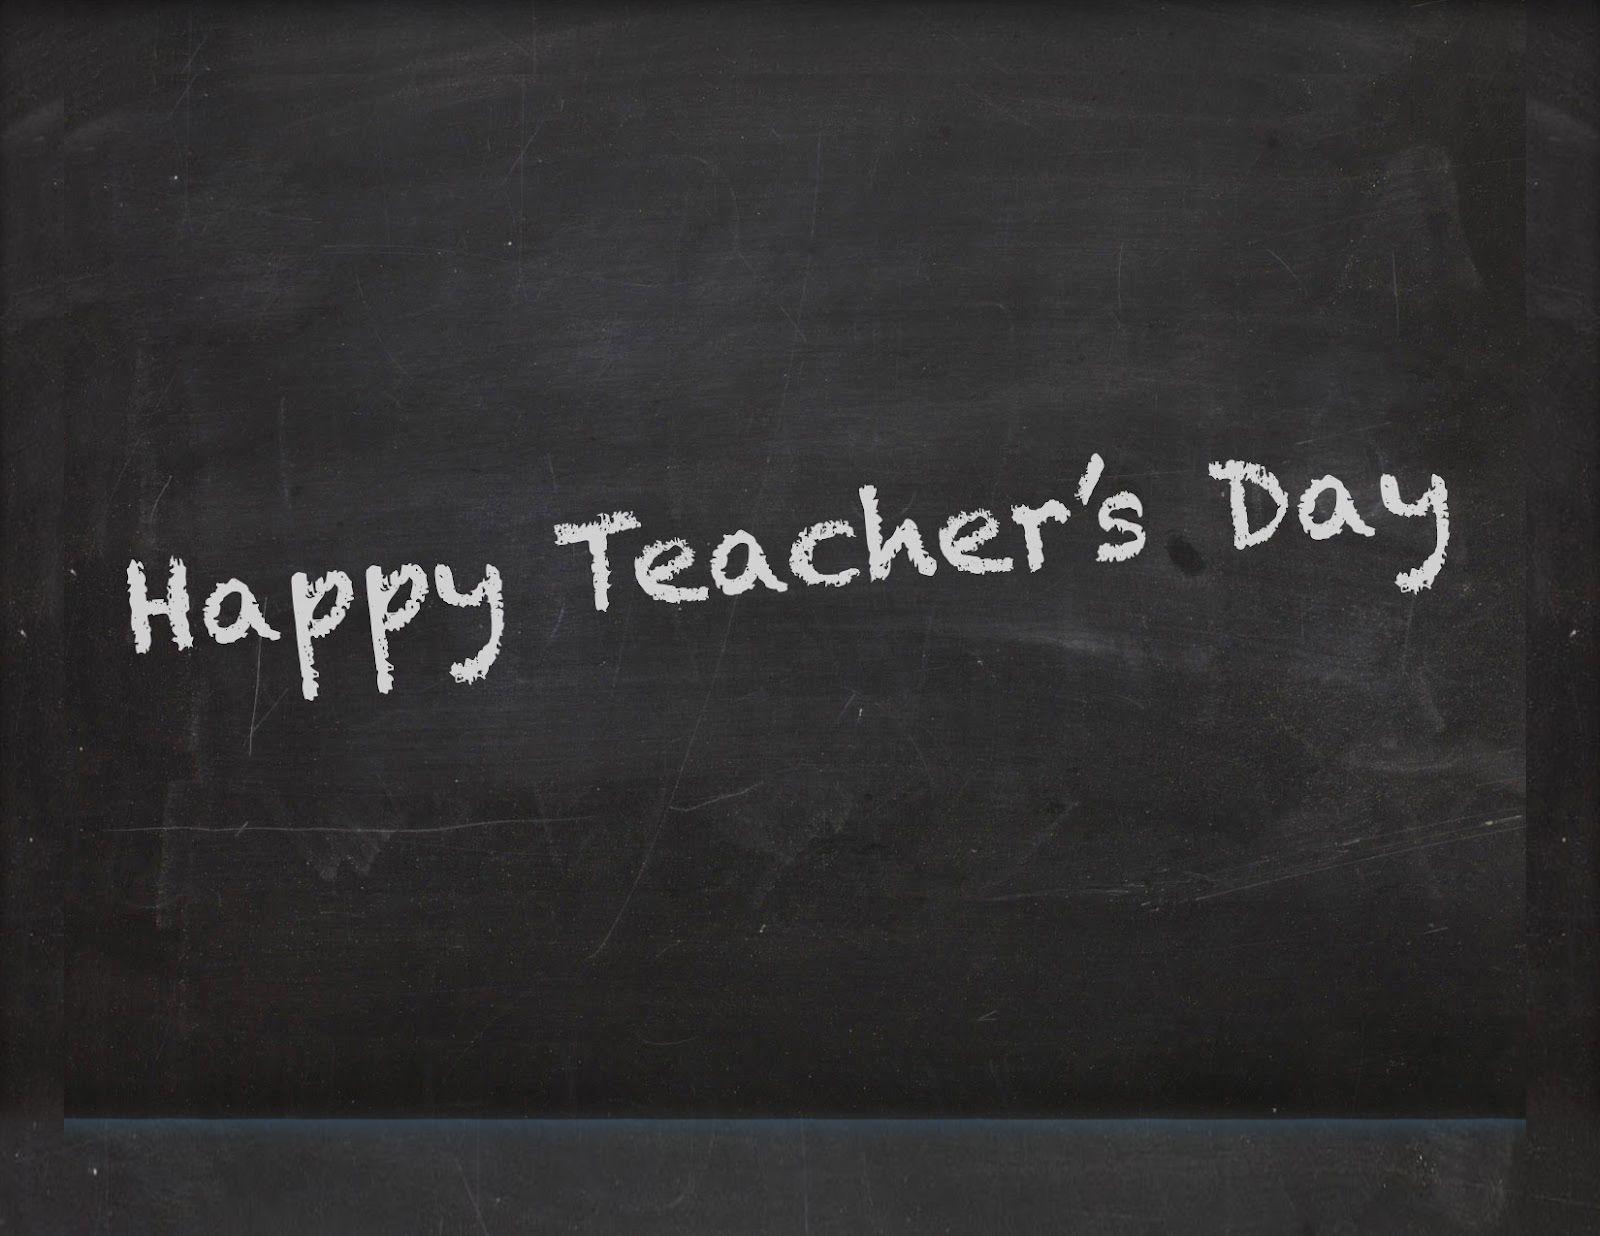 Happy Teachers Day Image, Picture and Wallpaper 2016